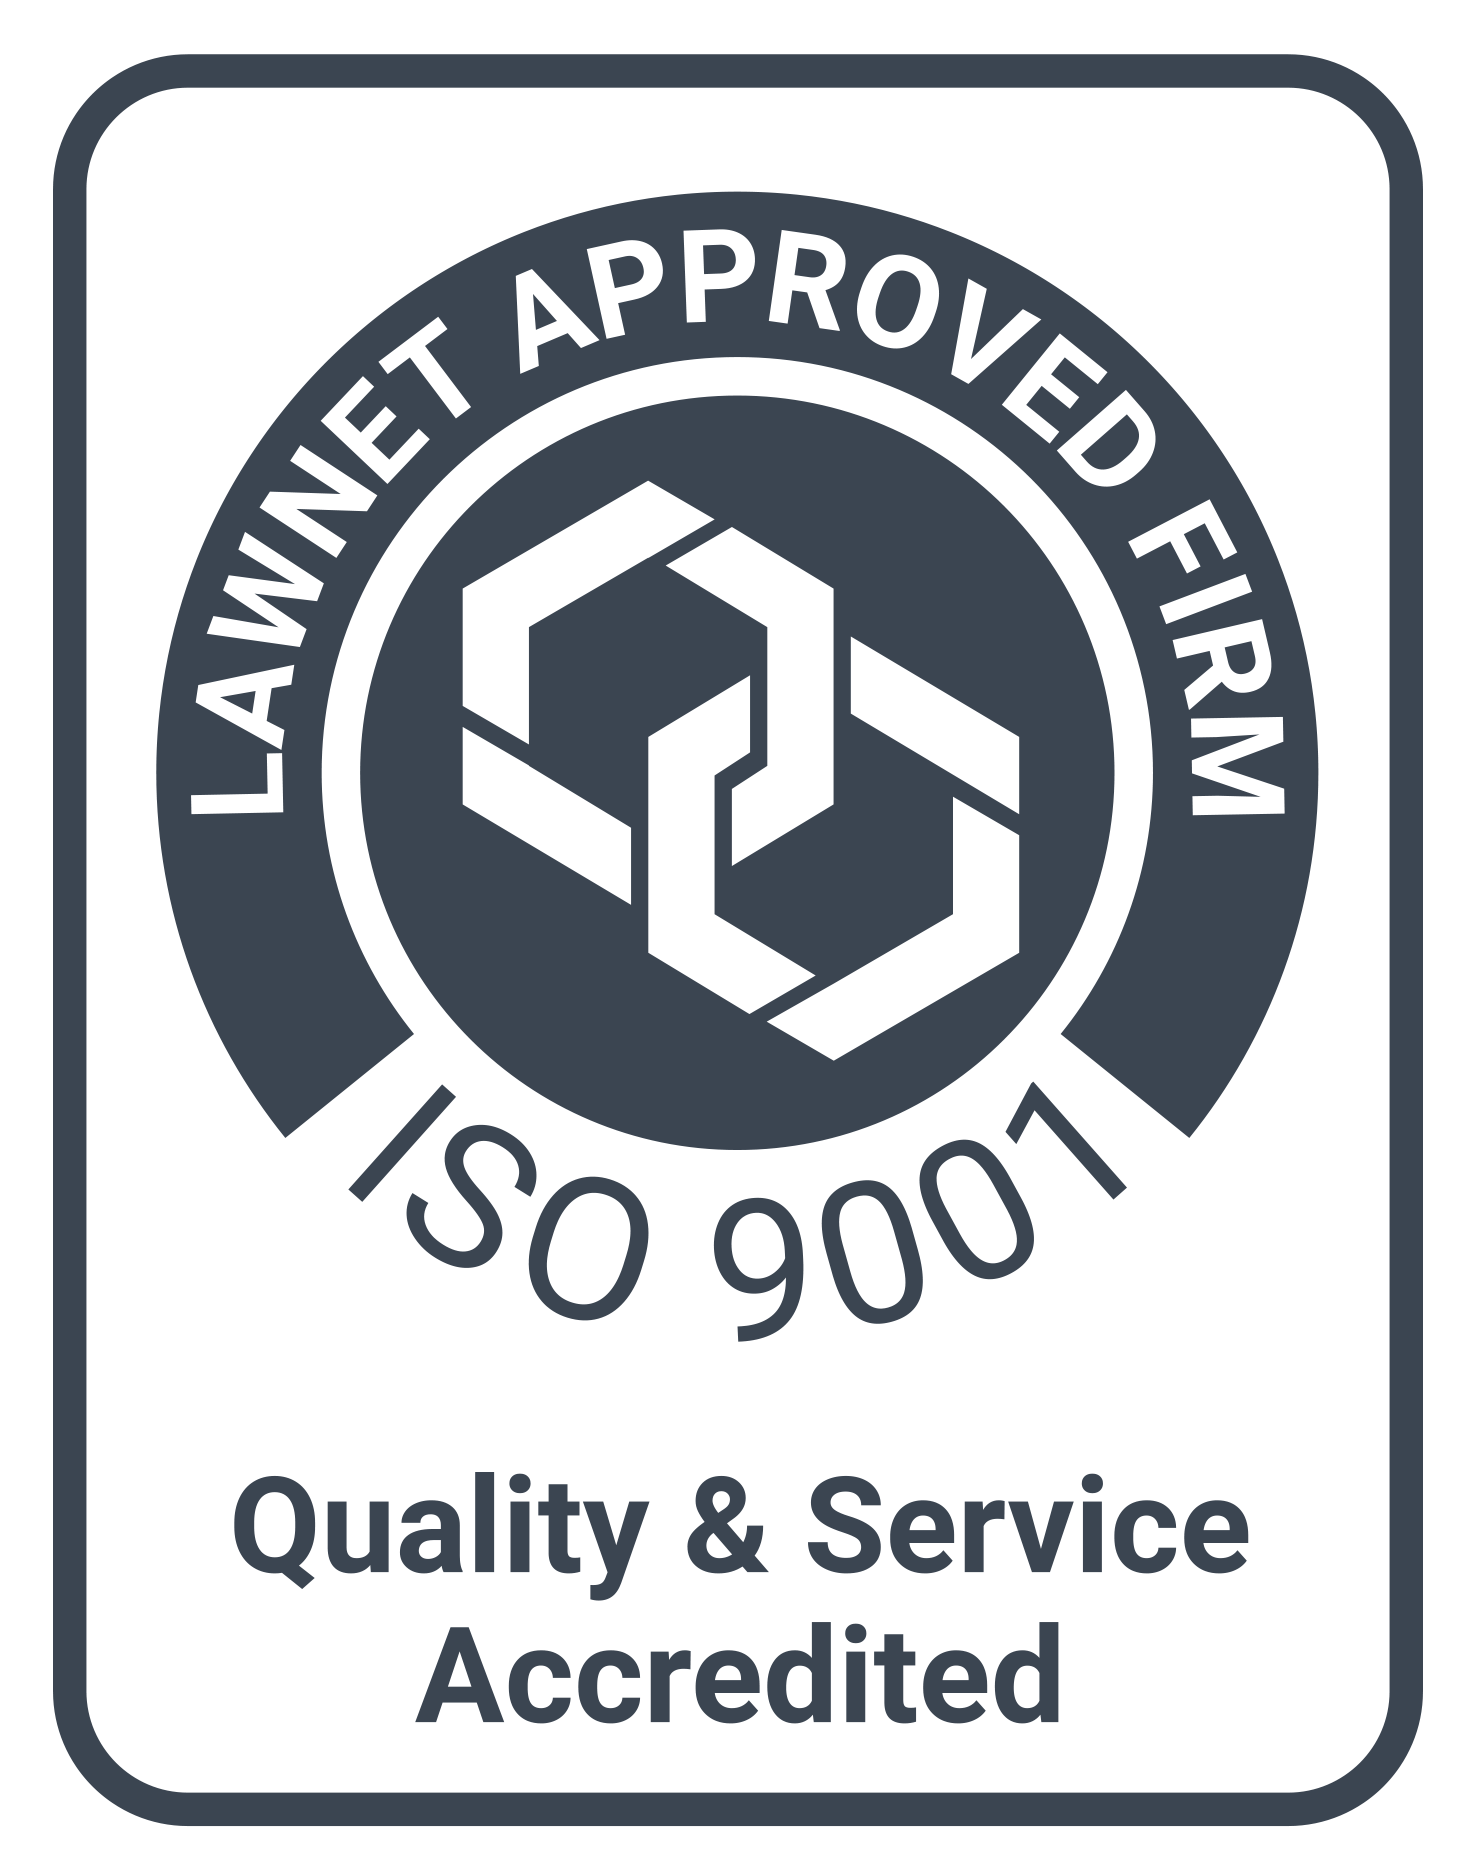 Quality & Service Accredited logo